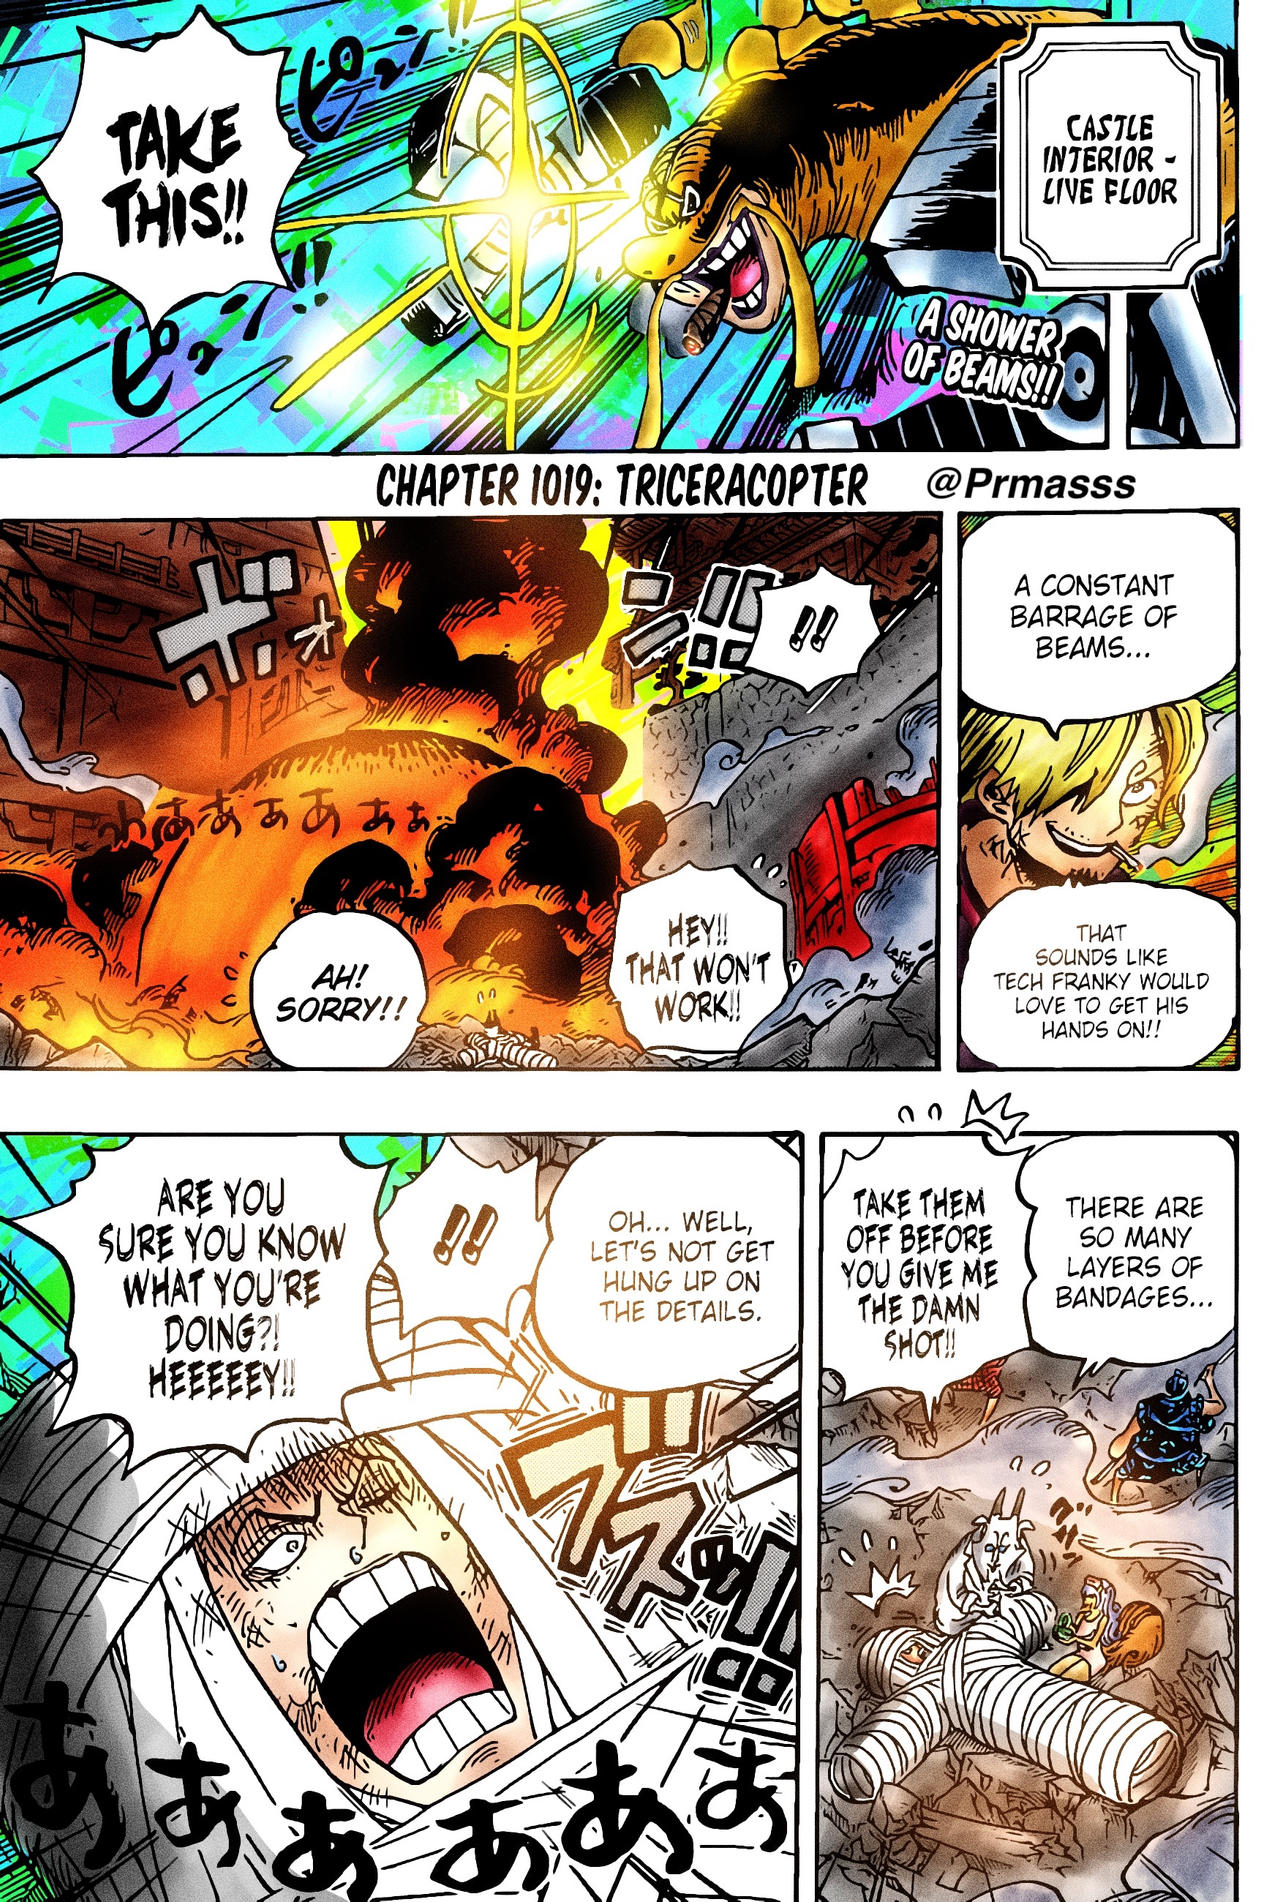 One Piece Chapter 1019 Coloring Queen Sanji Zoro By Prmas On Deviantart